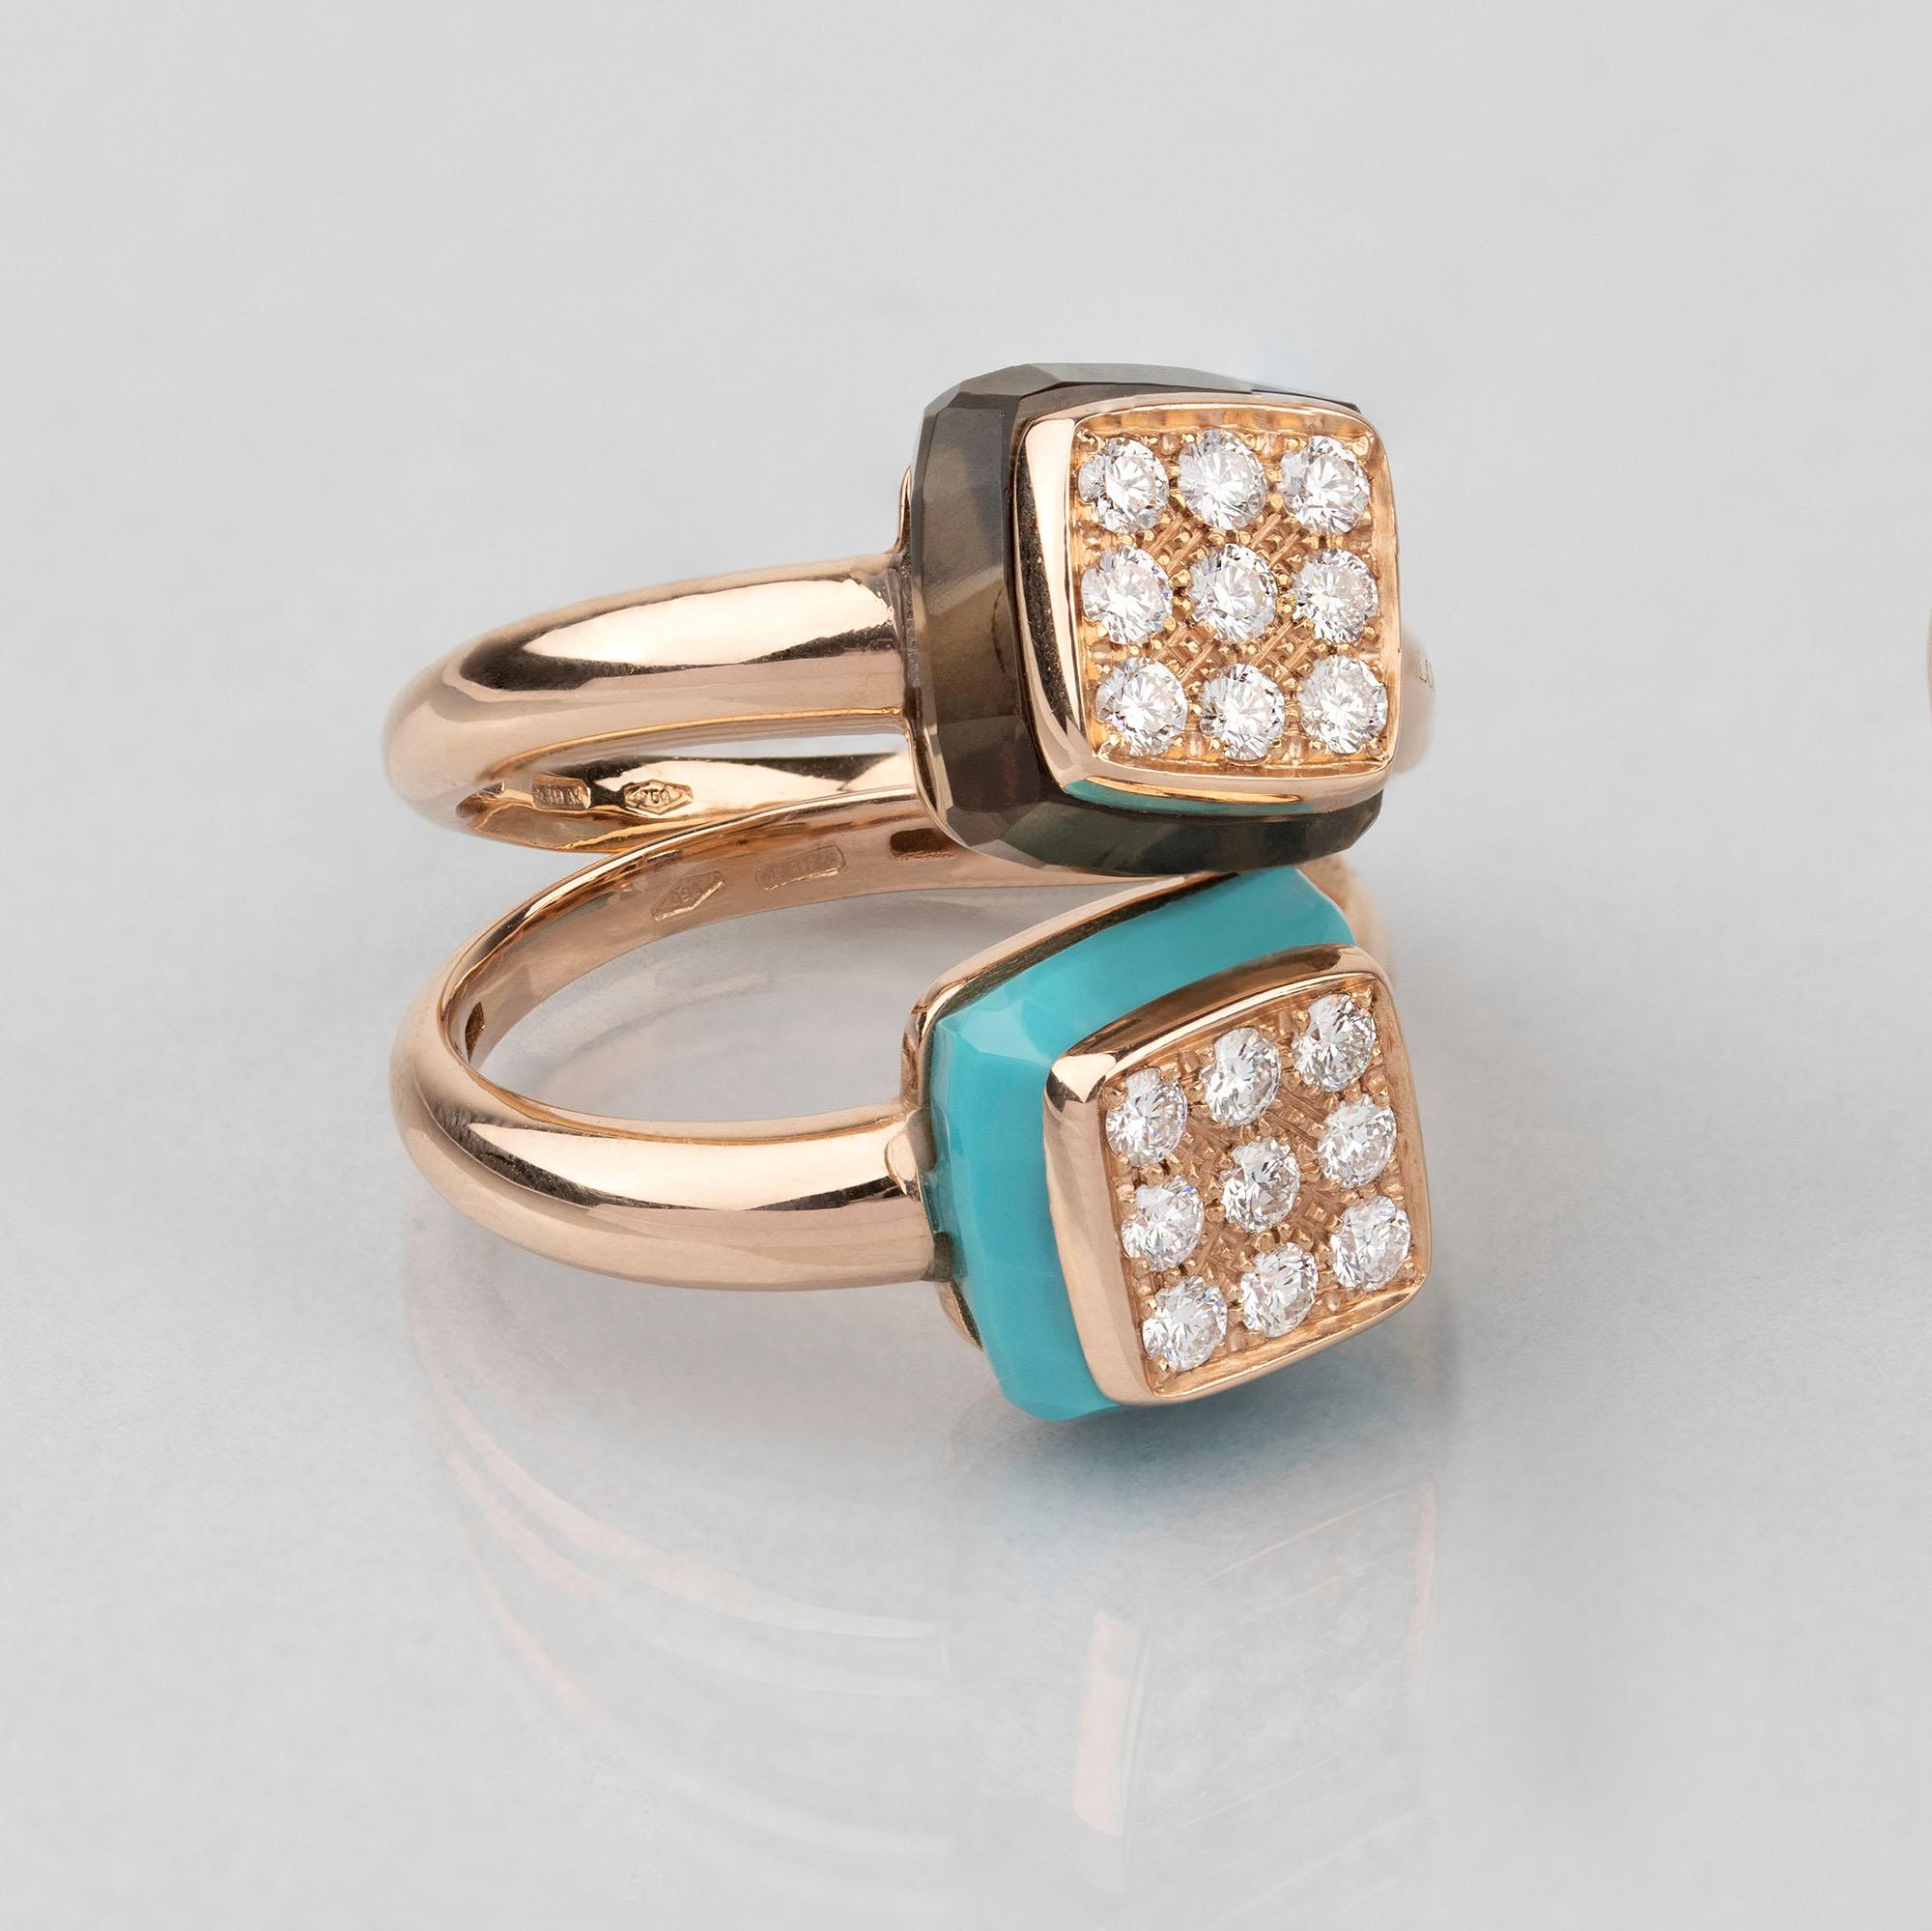 For Sale:  Les Petits Bonbons Ring Square with Smoky Quartz and Diamonds 3